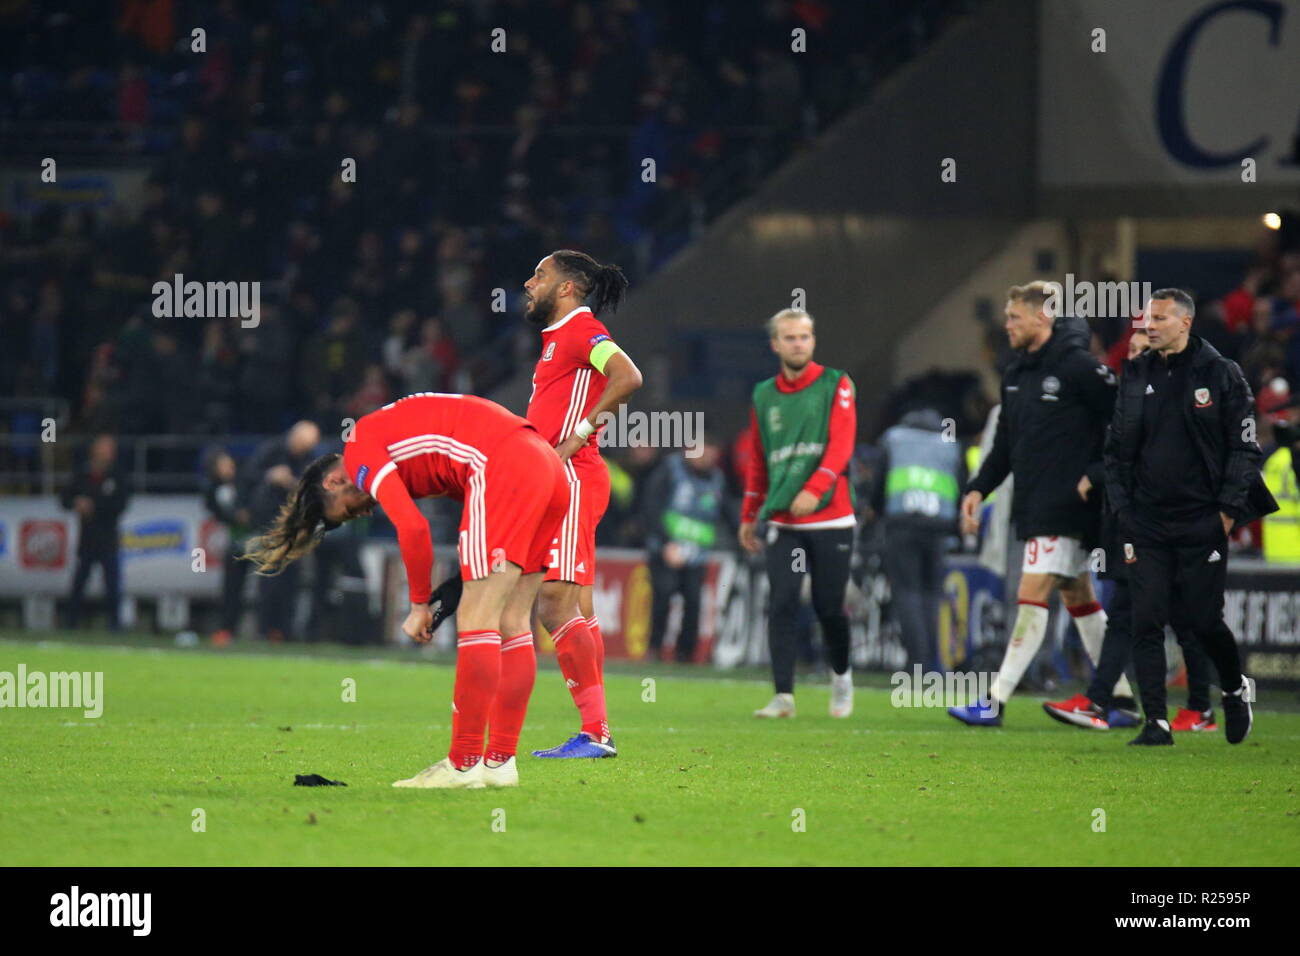 16th November 2018, the UEFA Nations League match Wales v Denmark at the Cardiff City Stadium. Gareth Bale, Ashley Williams of Wales are dejected at losing their game. News use only. Credit: www.garethjohn.uk/Alamy Live News Stock Photo